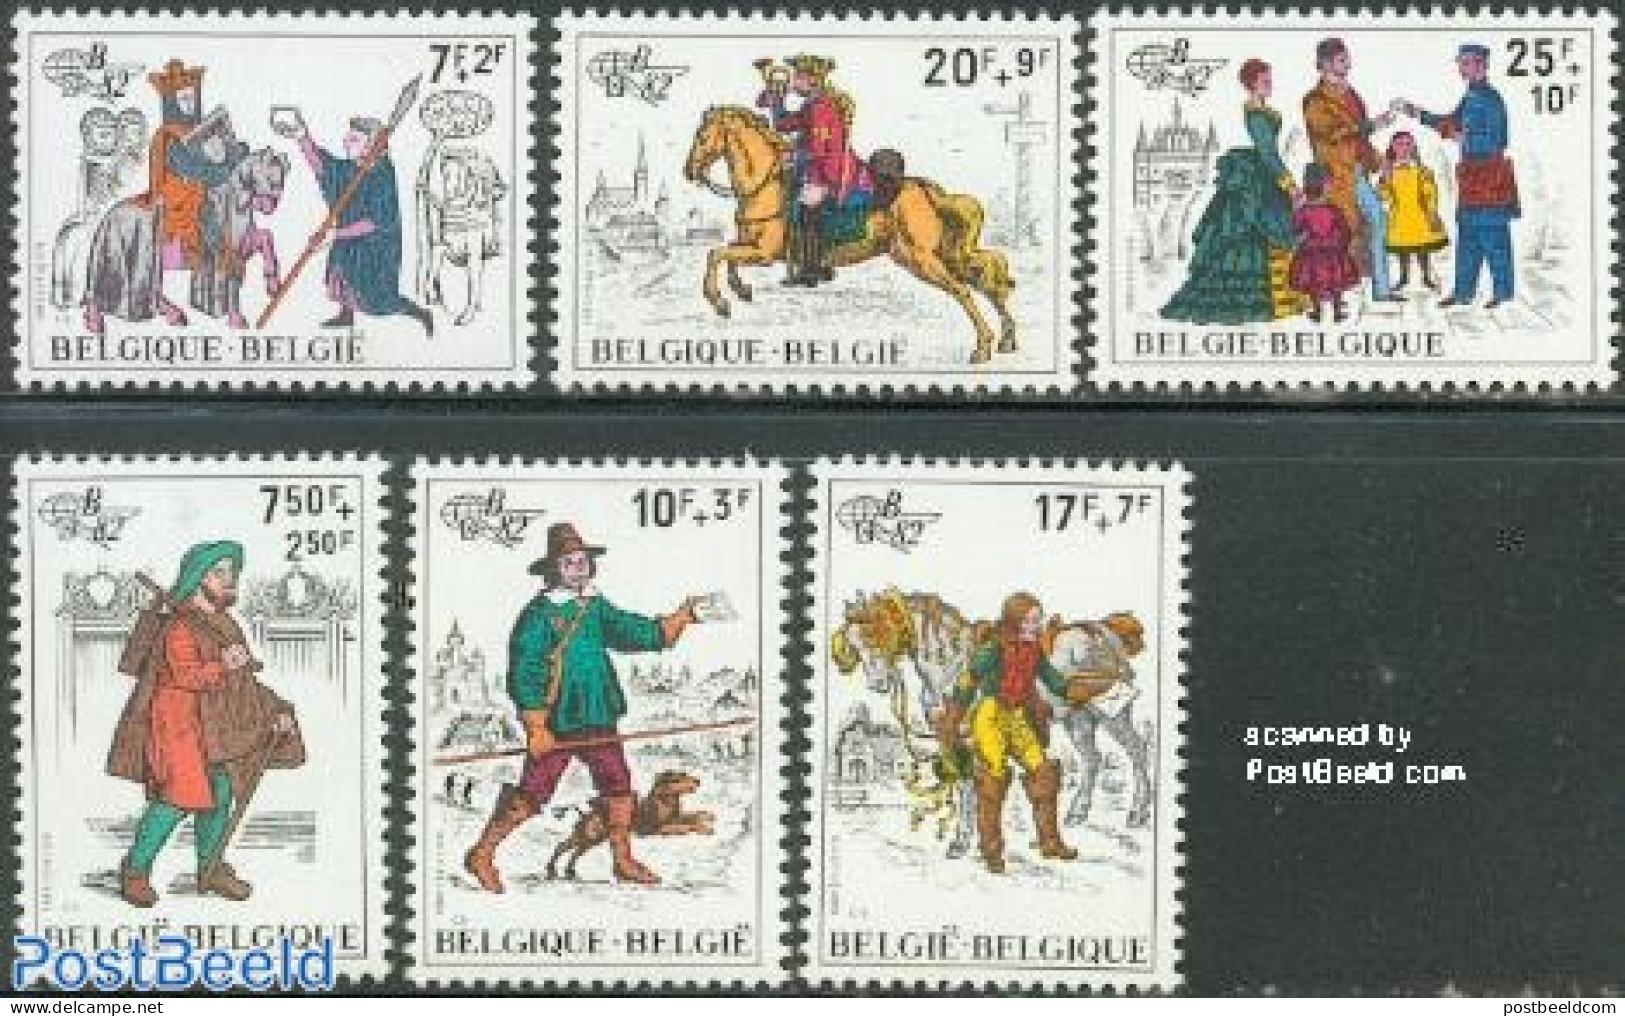 Belgium 1982 Belgica 82 6v, Mint NH, Nature - Dogs - Horses - Post - Art - Fashion - Unused Stamps